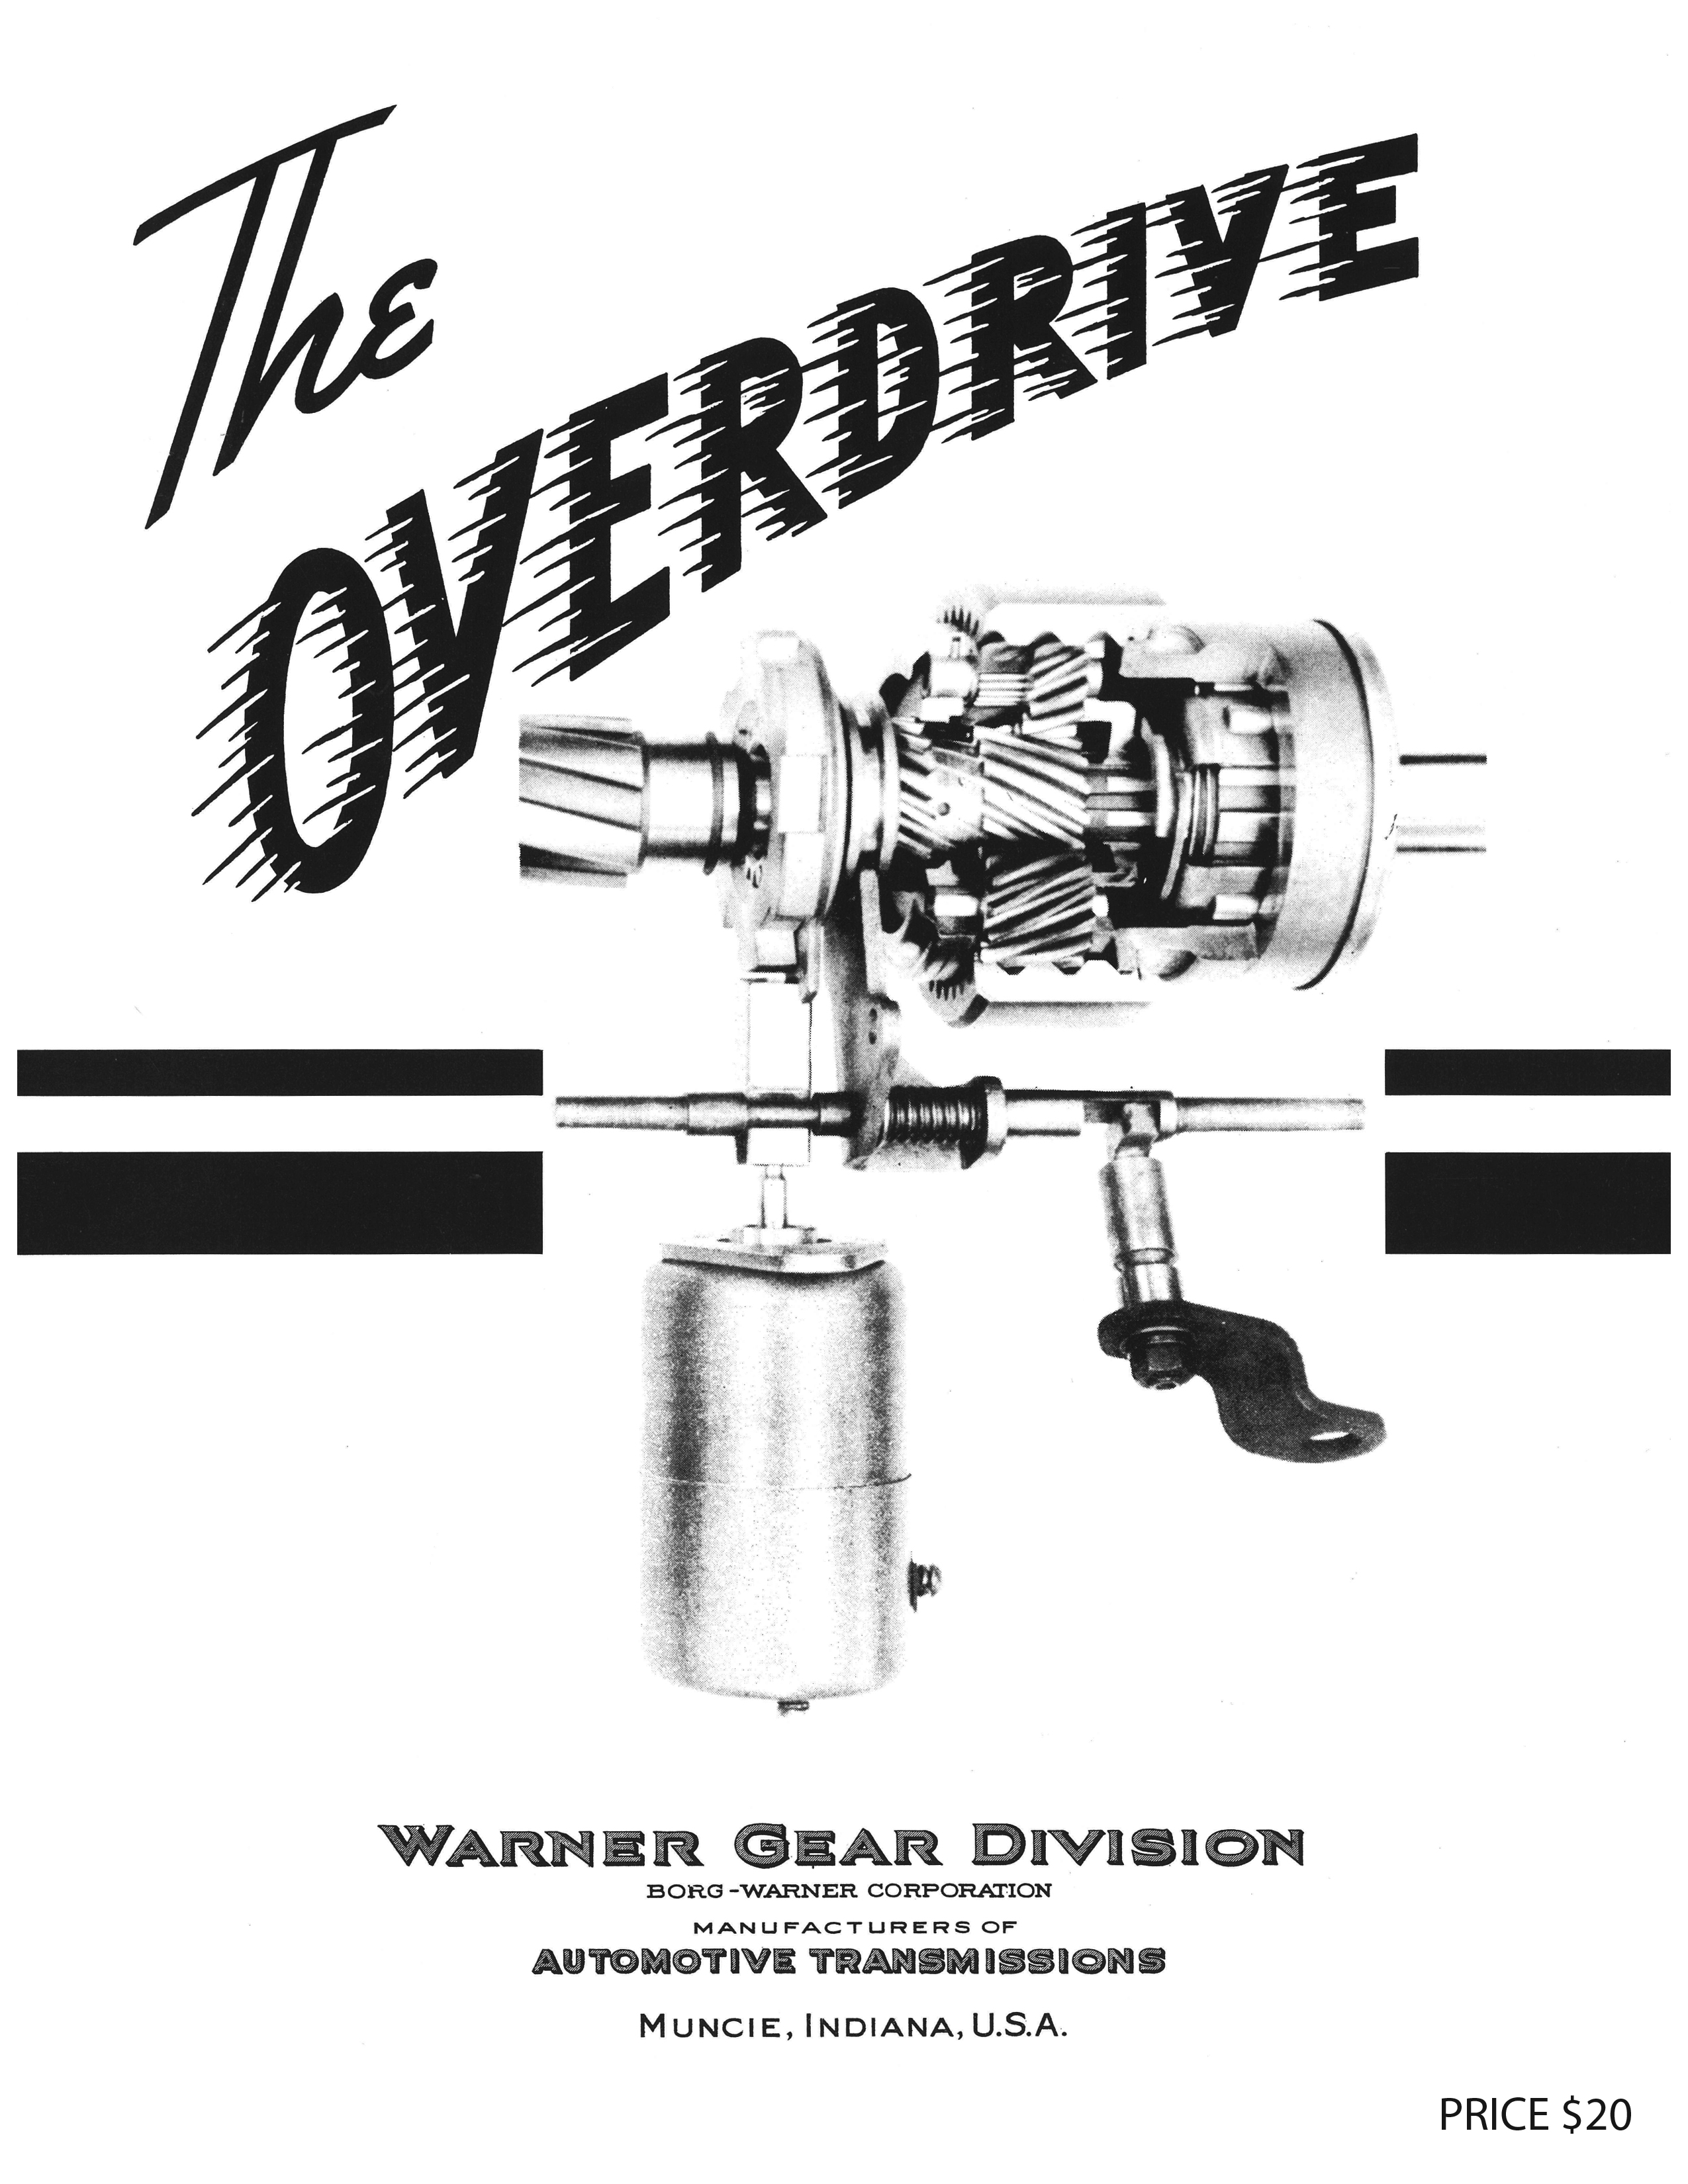 Getting Familiar with a Borg Warner Overdrive in Your Classic Car